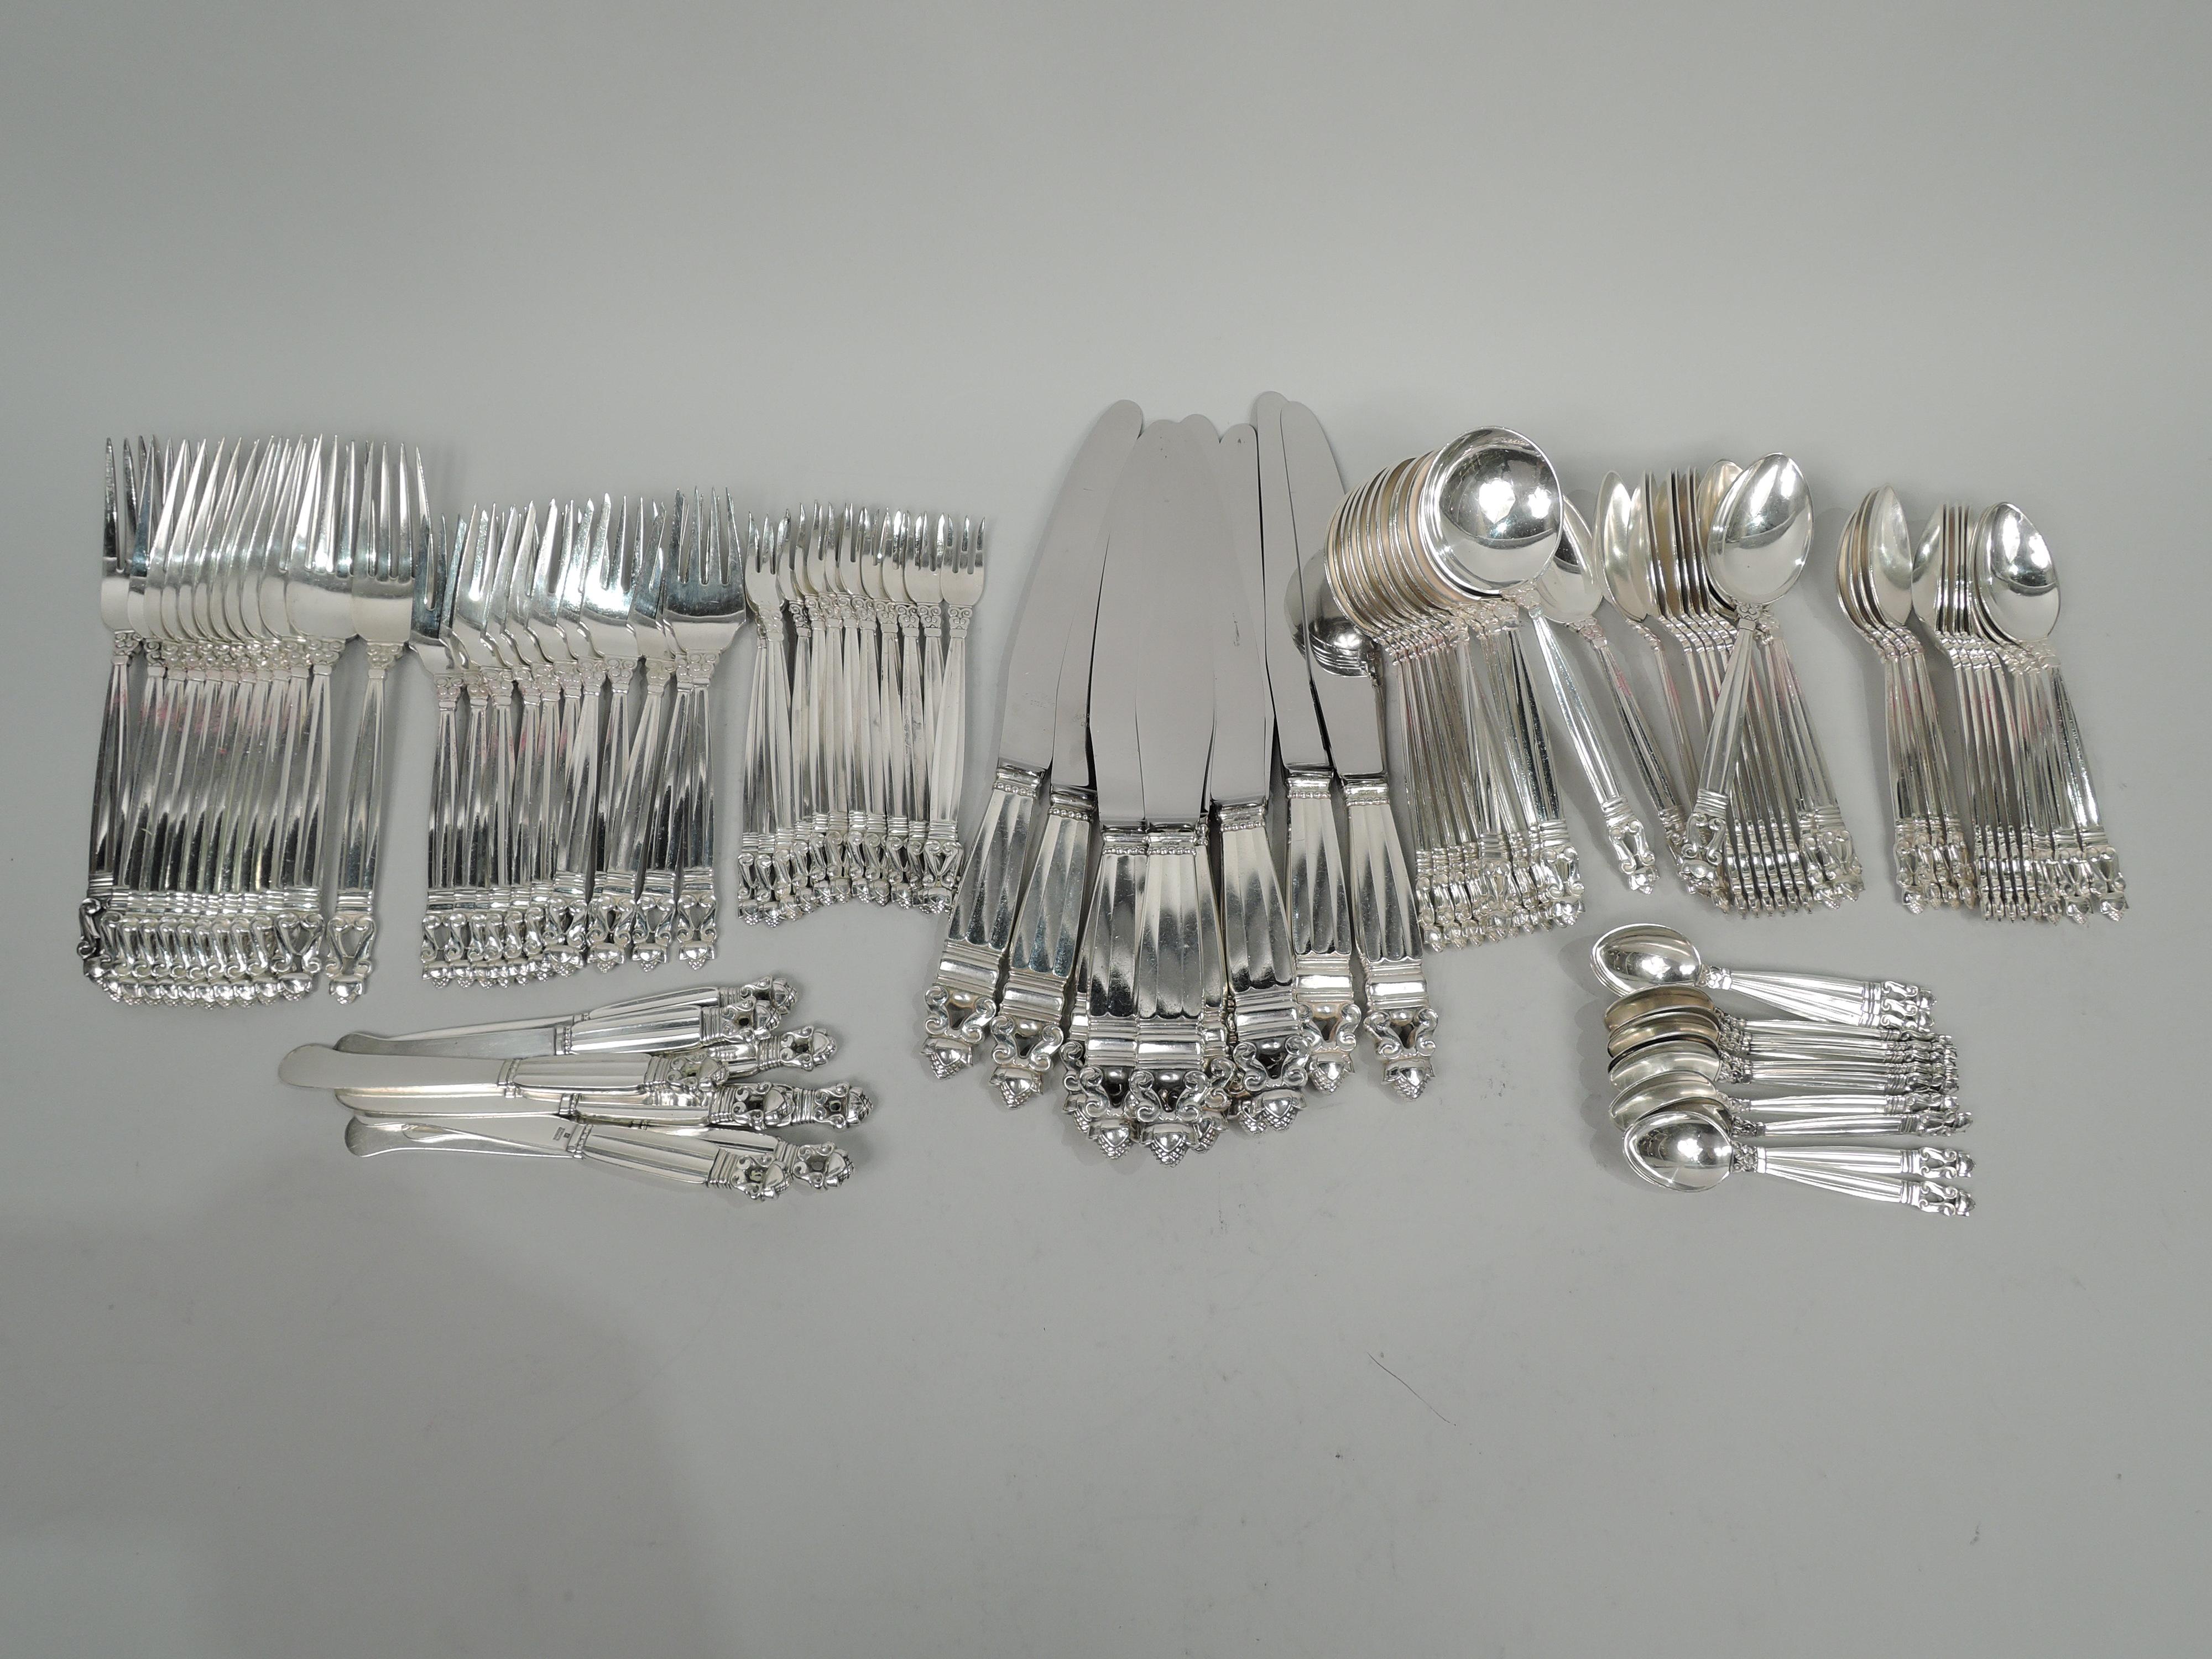 Acorn sterling silver dinner set. Made by Georg Jensen in Copenhagen. This set comprises 104 pieces (dimensions in inches):

Forks: 12 dinner forks (7 3/4), 12 salad forks (6 5/8), and 12 seafood forks (5 5/8);

Spoons: 12 teaspoons (6 1/8), 12